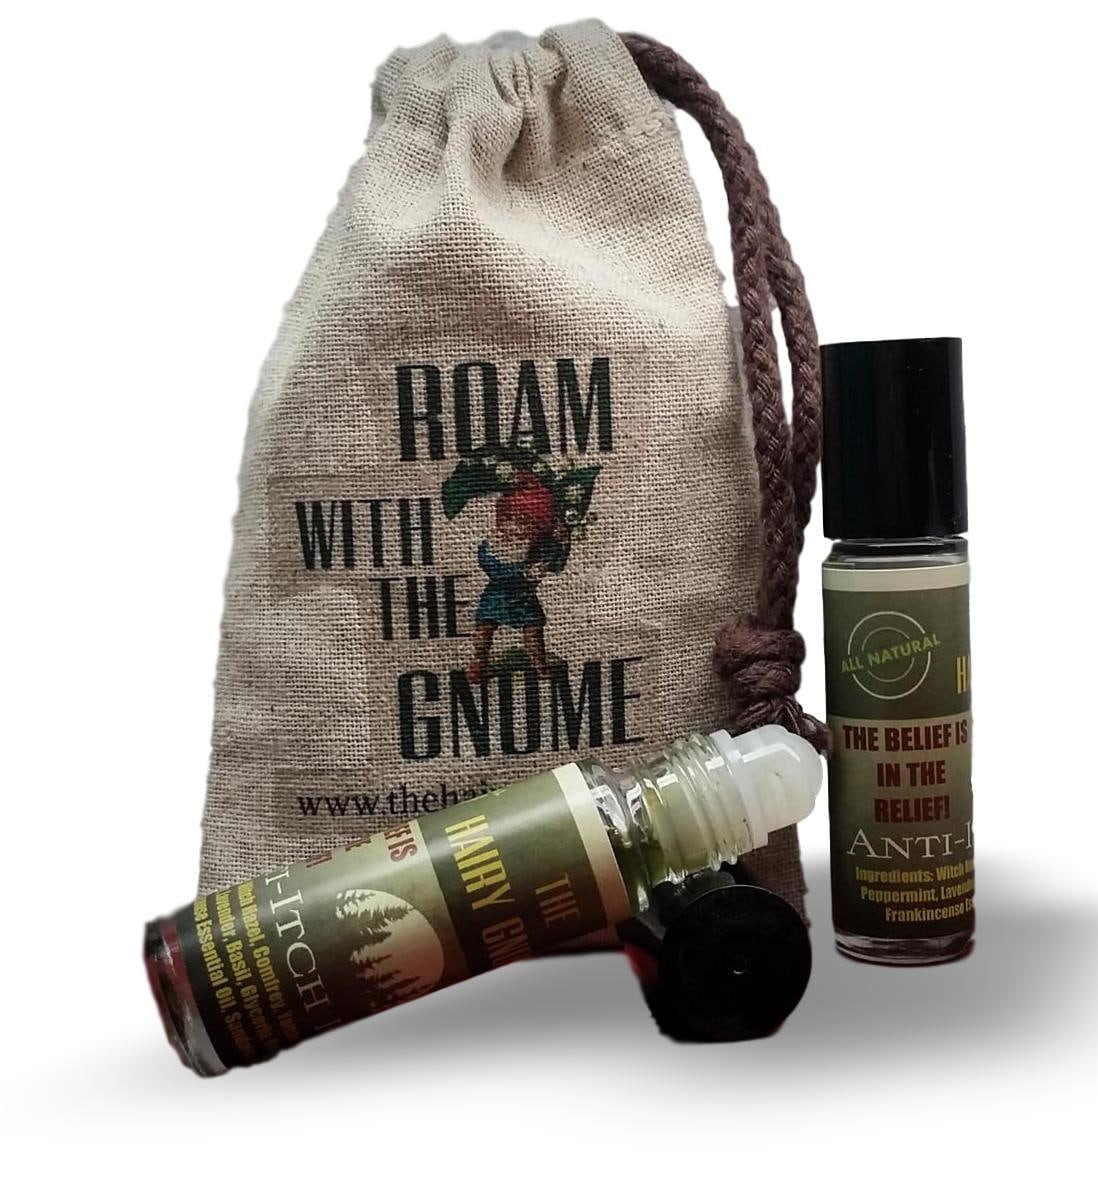 THE HAIRY GNOME-4pc. Gift Set. Organic, Eco-Friendly Medicinal Set for your Camping/Hiking/Outdoorsmen Friends and Family!